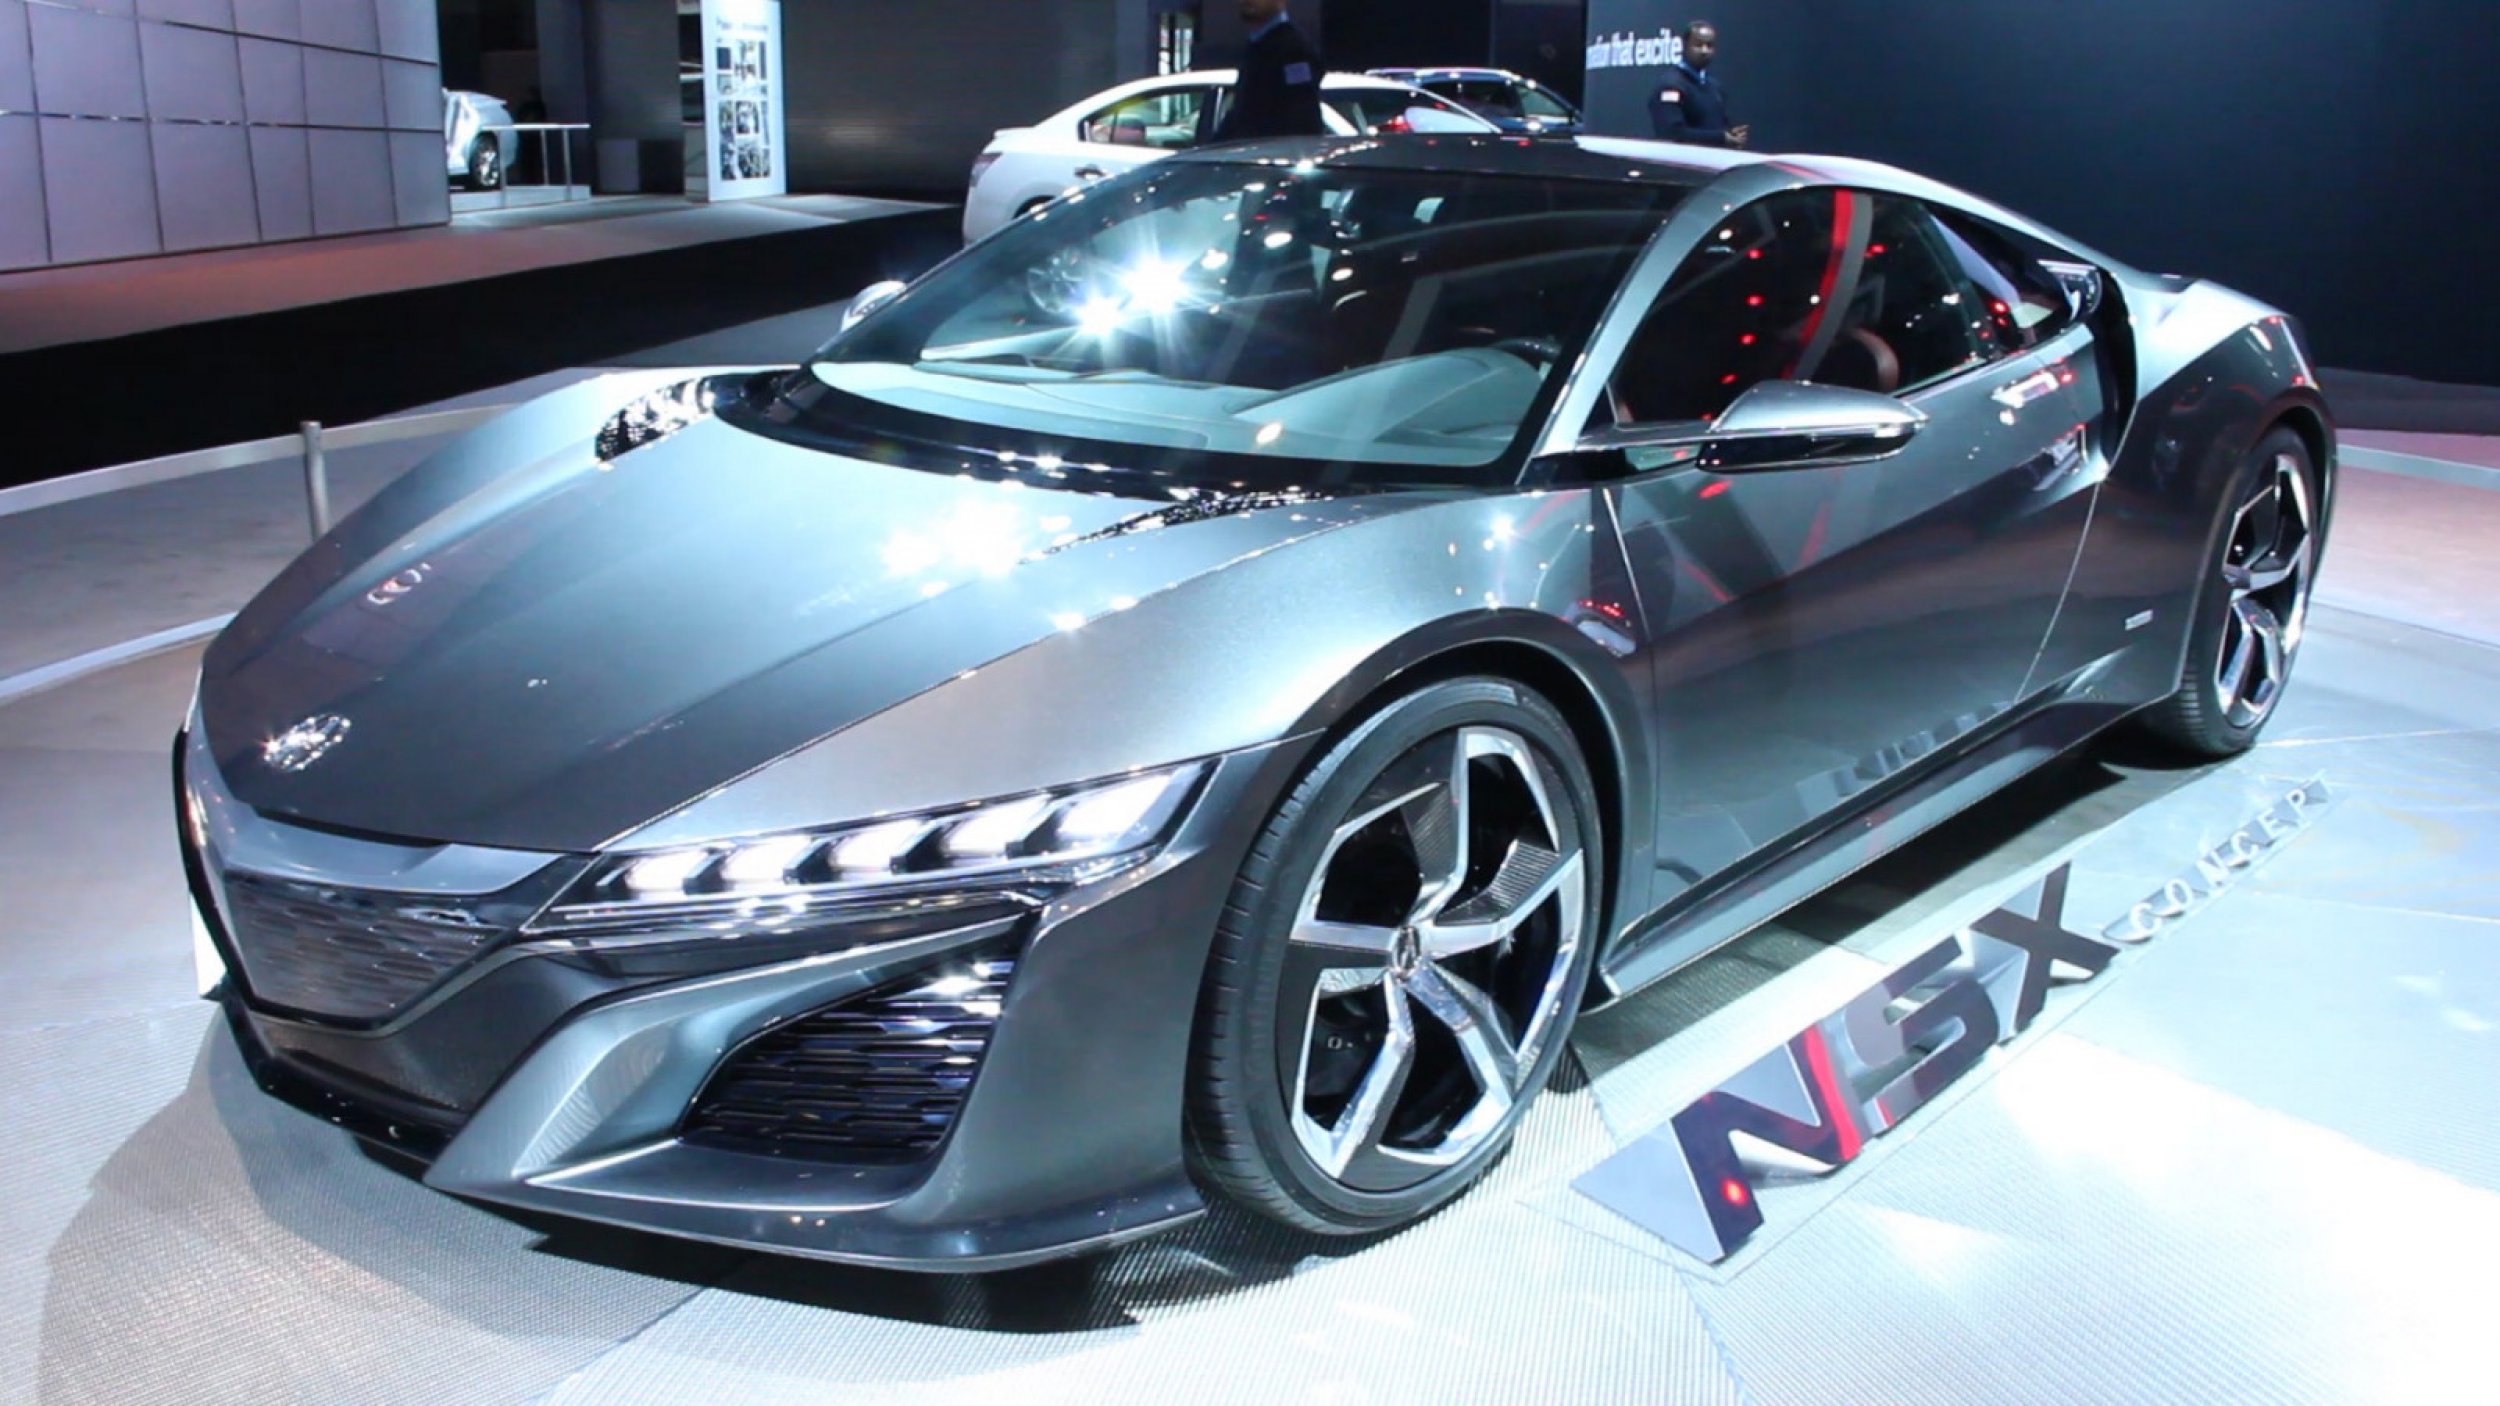 2013 New York Auto Show 2015 Acura NSX Shaking Up The World Of Supercars